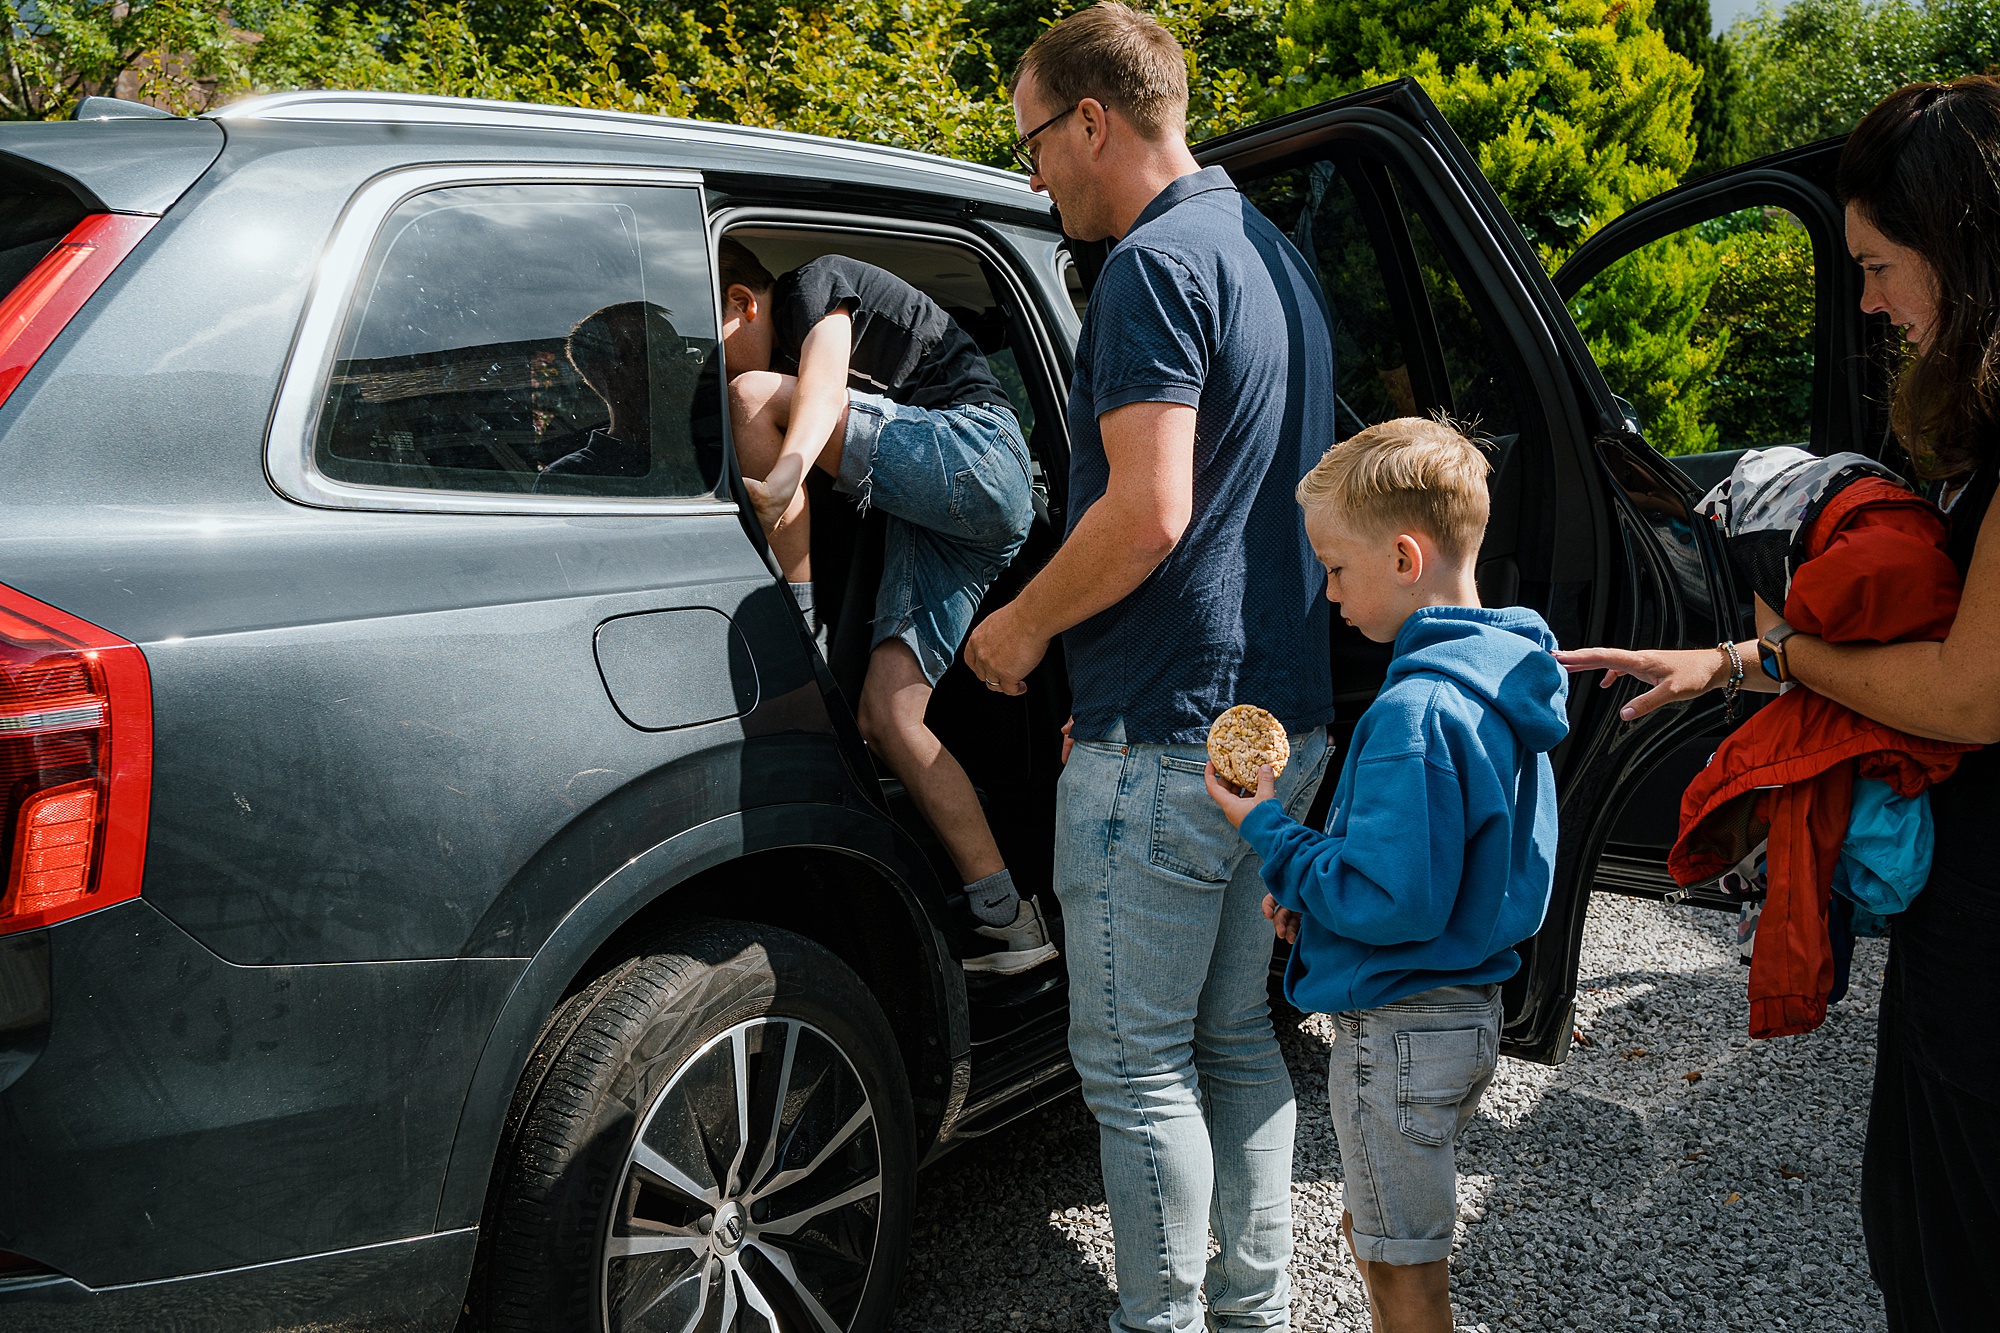 Family of 6 queuing to get in the car, real life family documentary photography UK